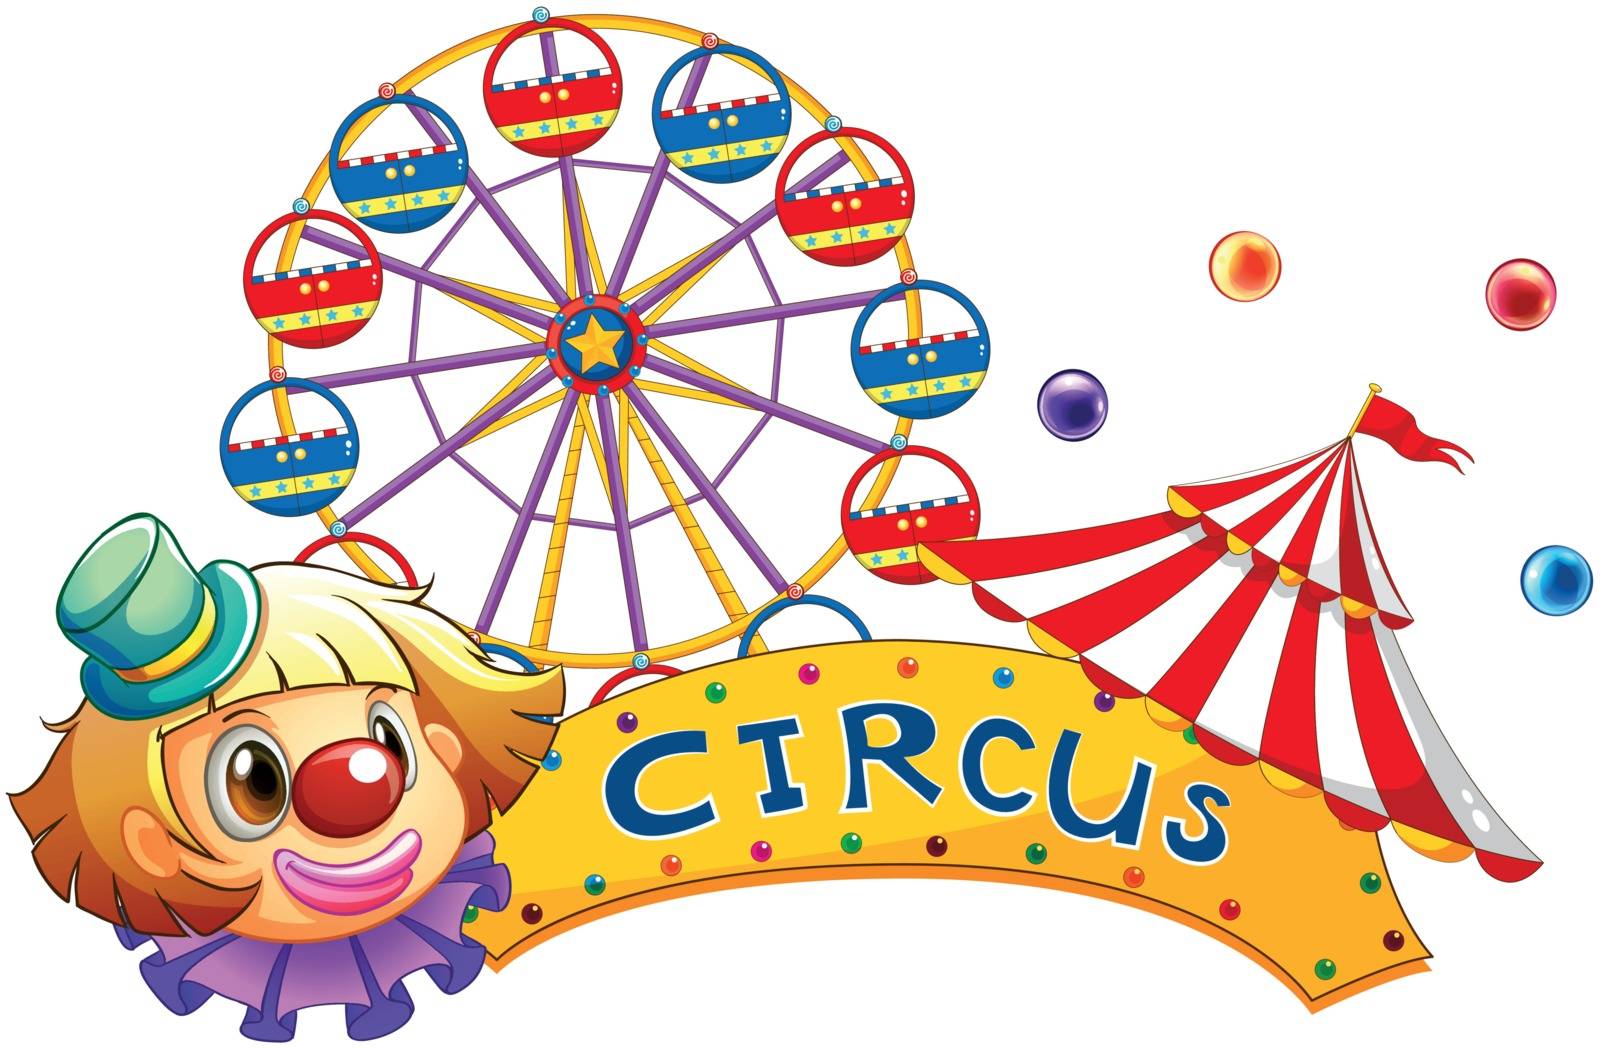 A circus signboard by iimages